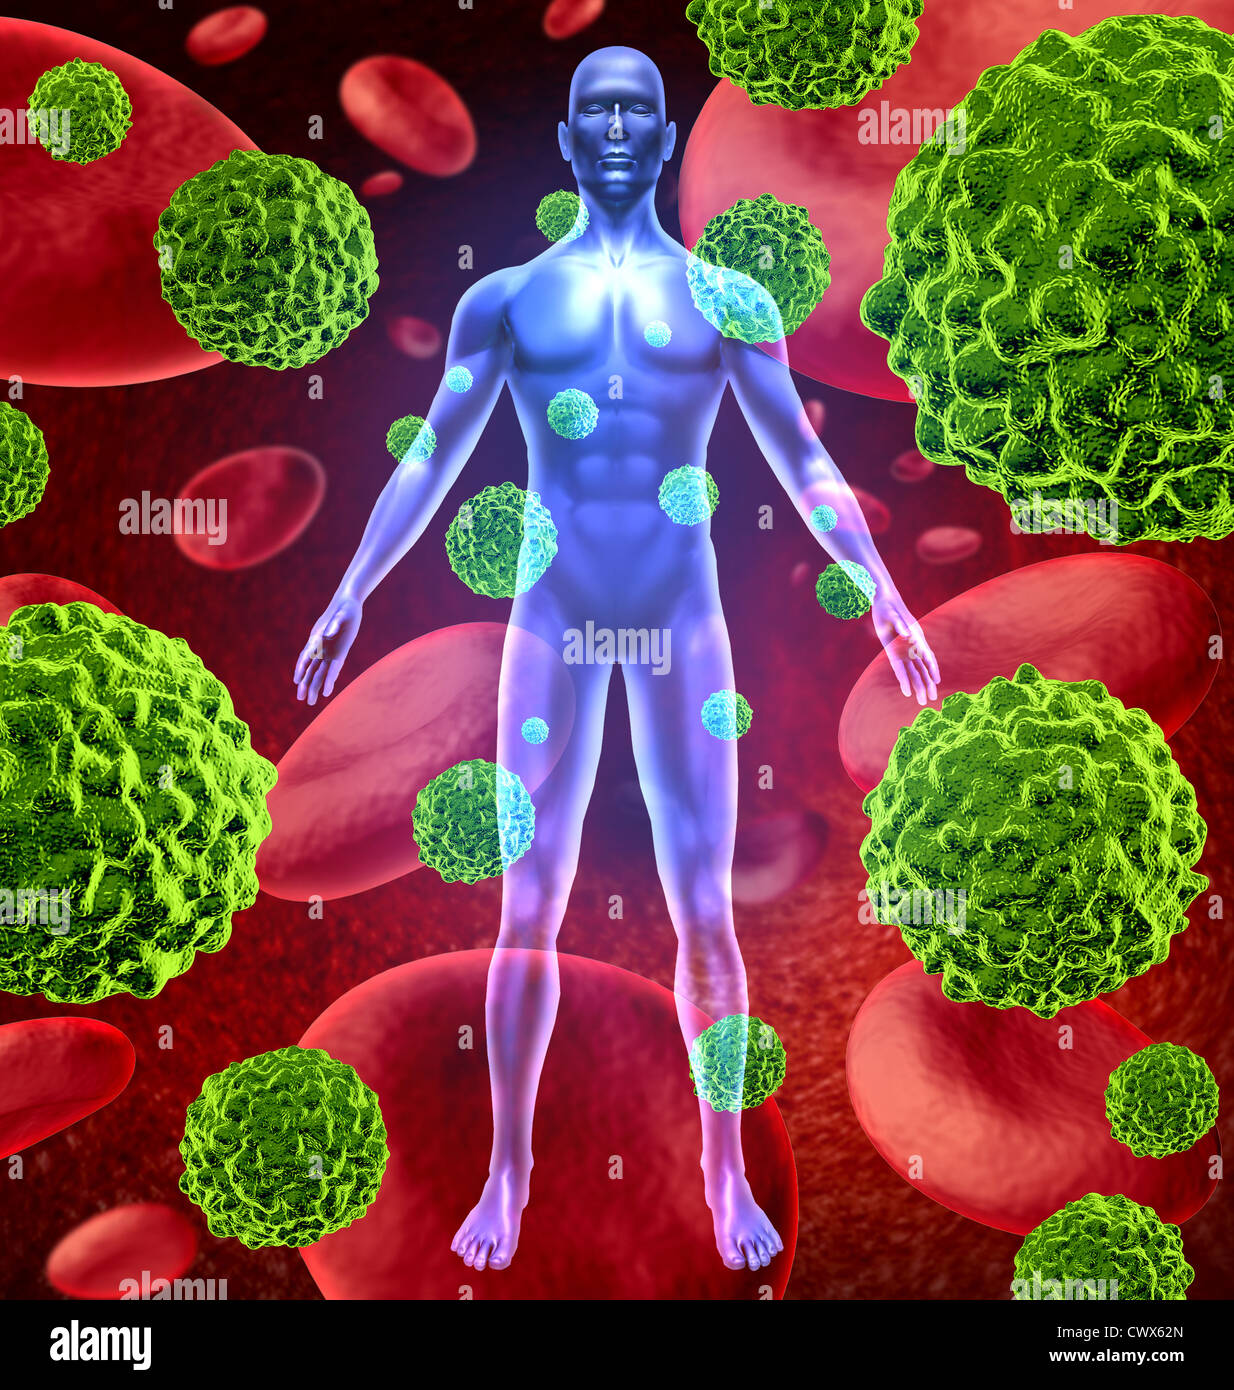 Human body with cancer cells spreading and growing through the body via red blood as malignant cells due to environmental carcinogens and genetic tumors and cell damage. Stock Photo